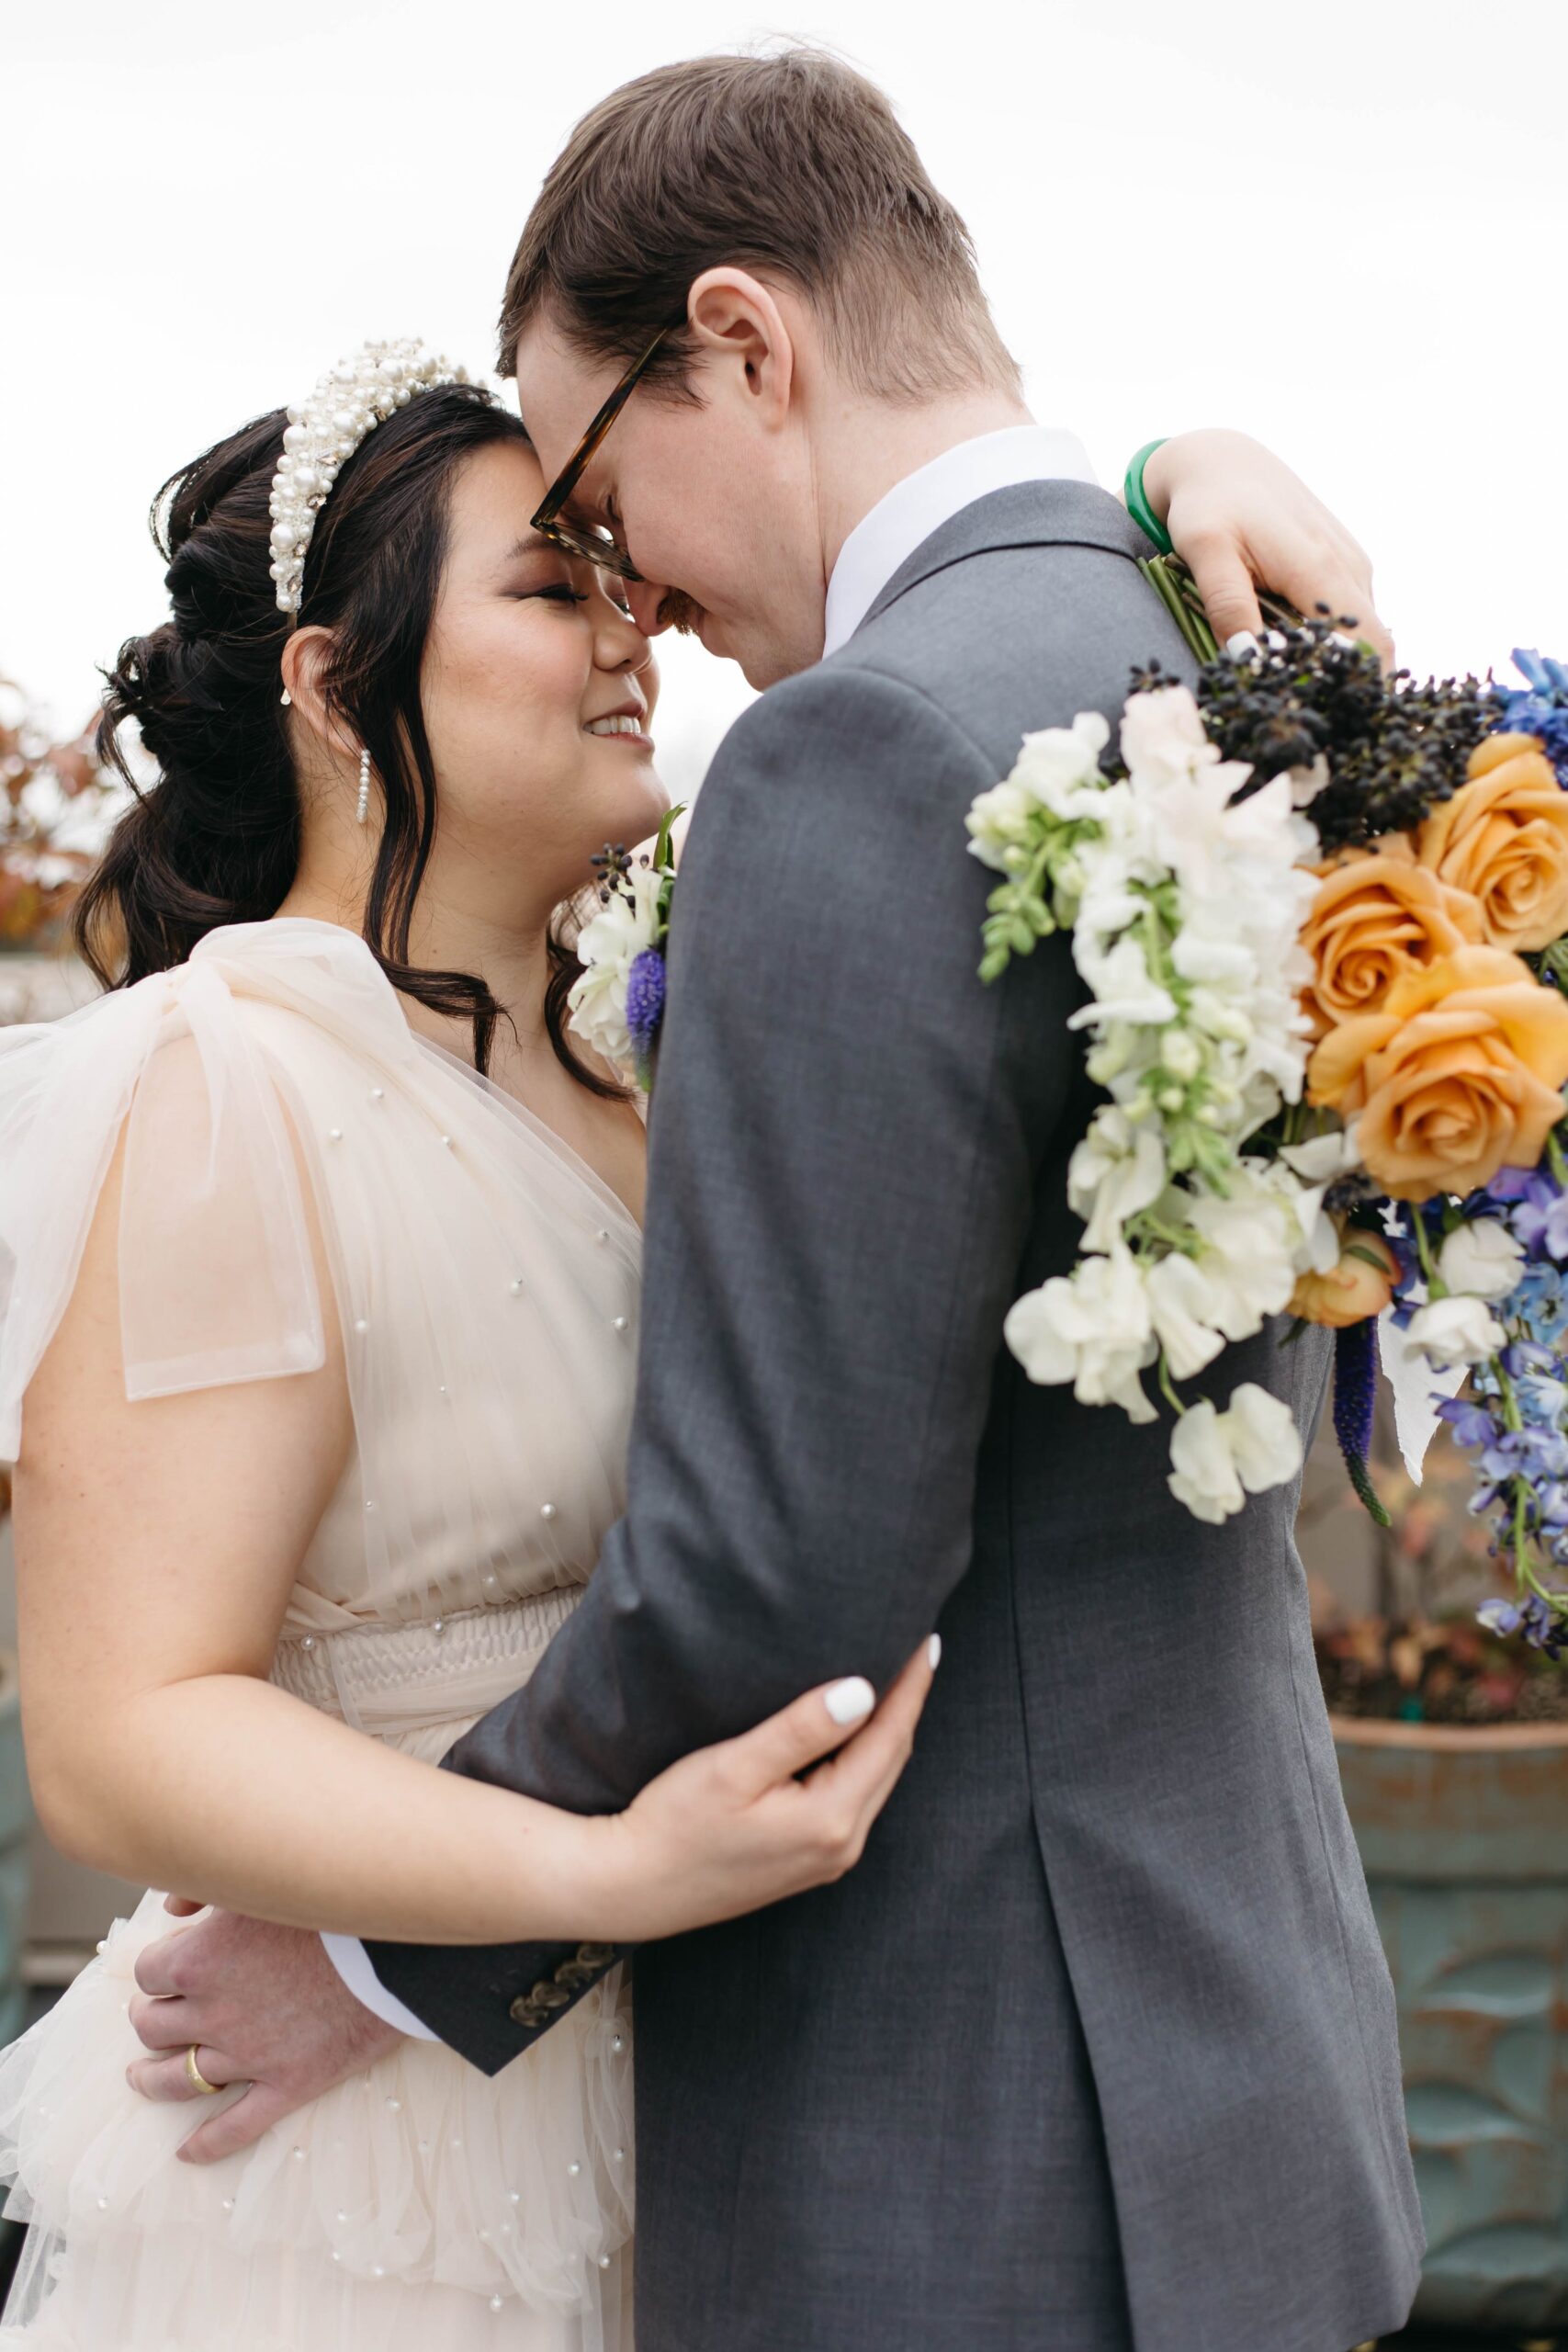  colorful whimsical small wedding elopement in Portland, Oregon. Lolo pass hotel. Purple, blue, and orange floral arrangement, fine china, beautiful place setting, private rooftop vows 